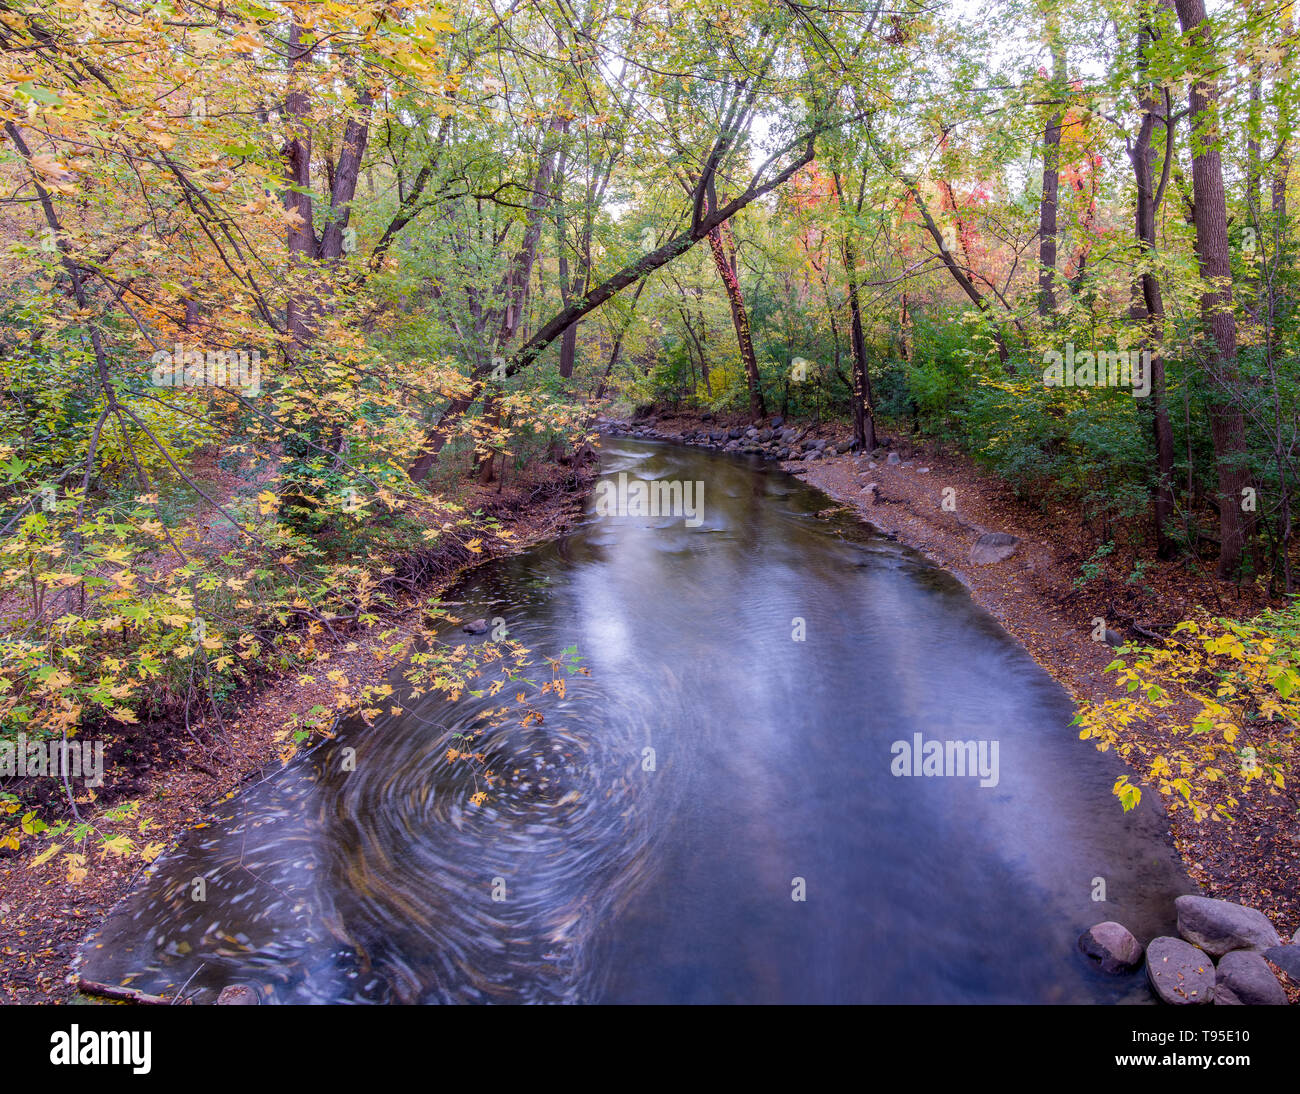 Colorful fall leaves on trees and in the water of the Minnehaha Creek in Minneapolis, Minnesota - long exposure of the flowing creek water with fallen Stock Photo